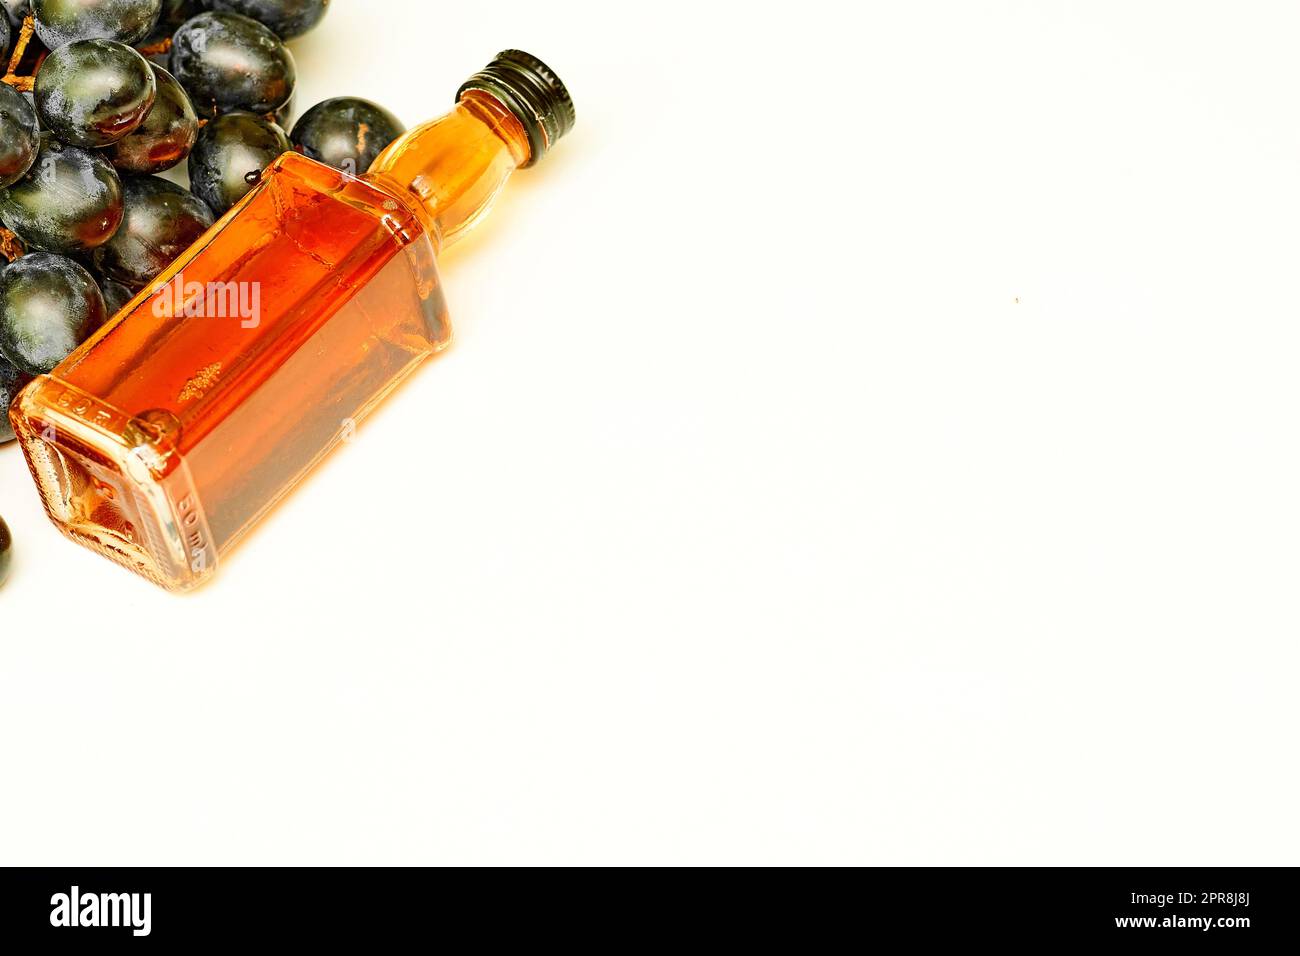 Good old brandy, cognac and black ripe grapes Stock Photo